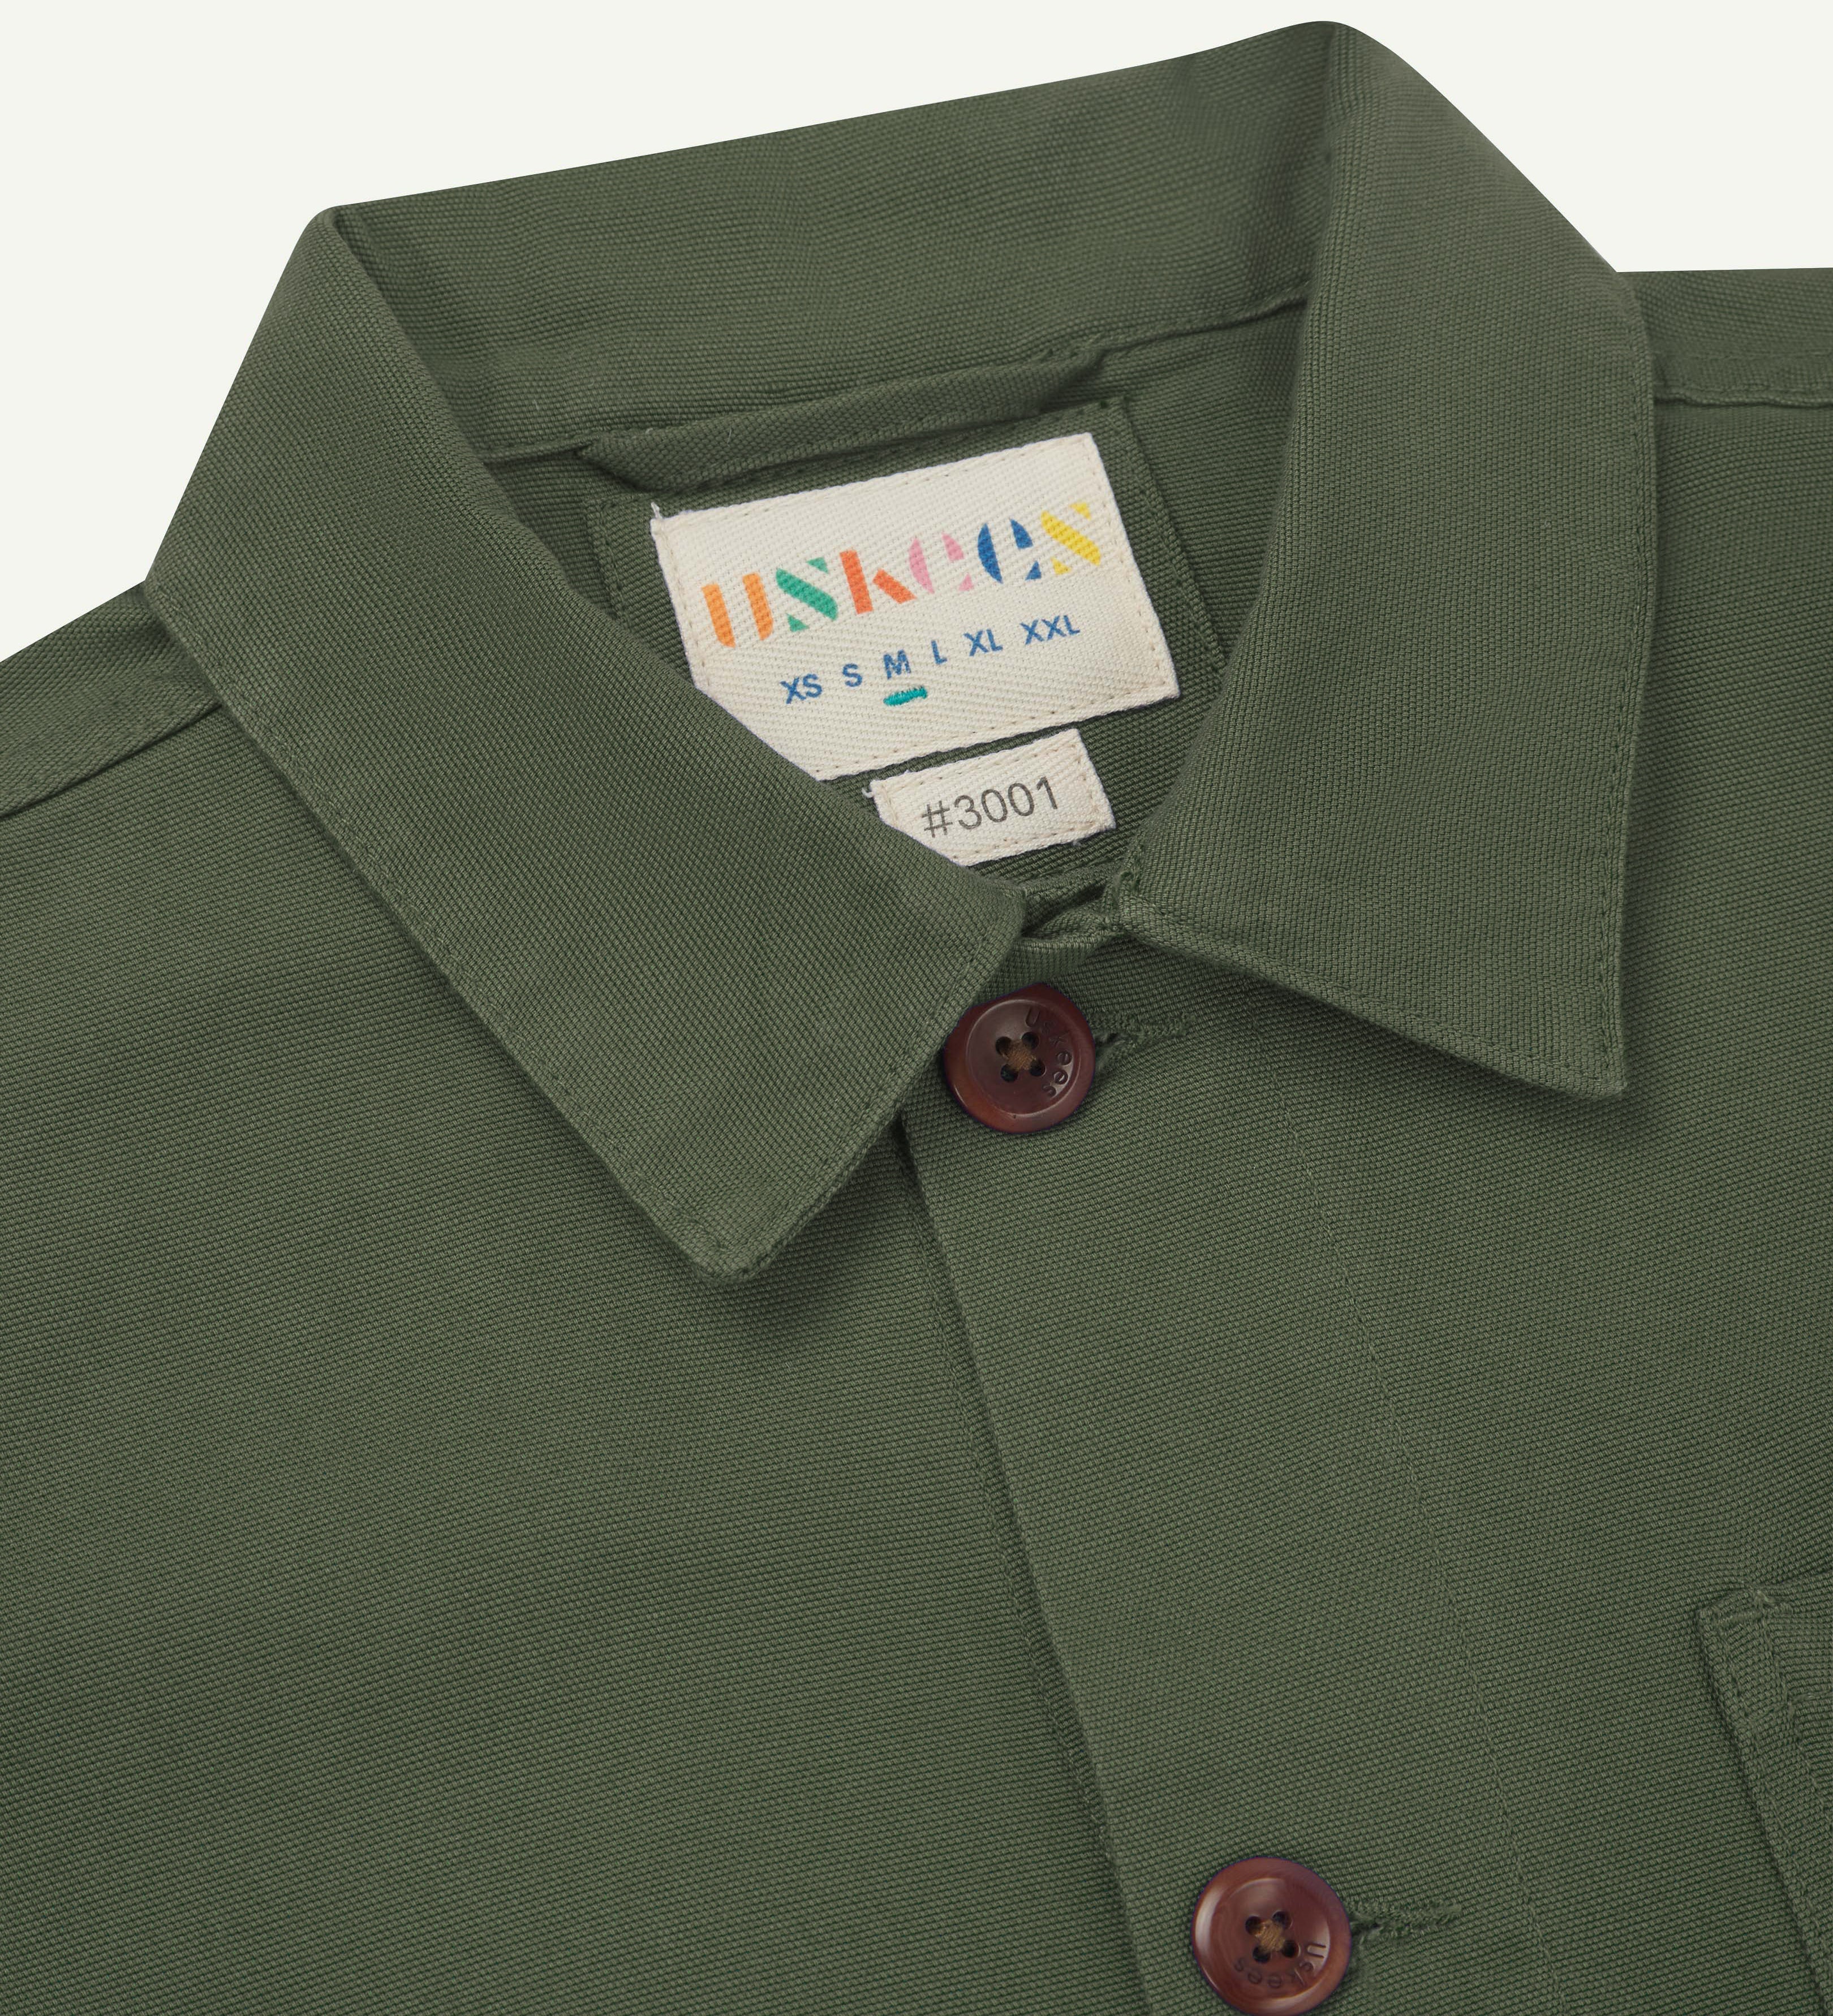 Front detail shot of  the neck and front buttons of a coriander green men's overshirt  showing the uskees brand  label